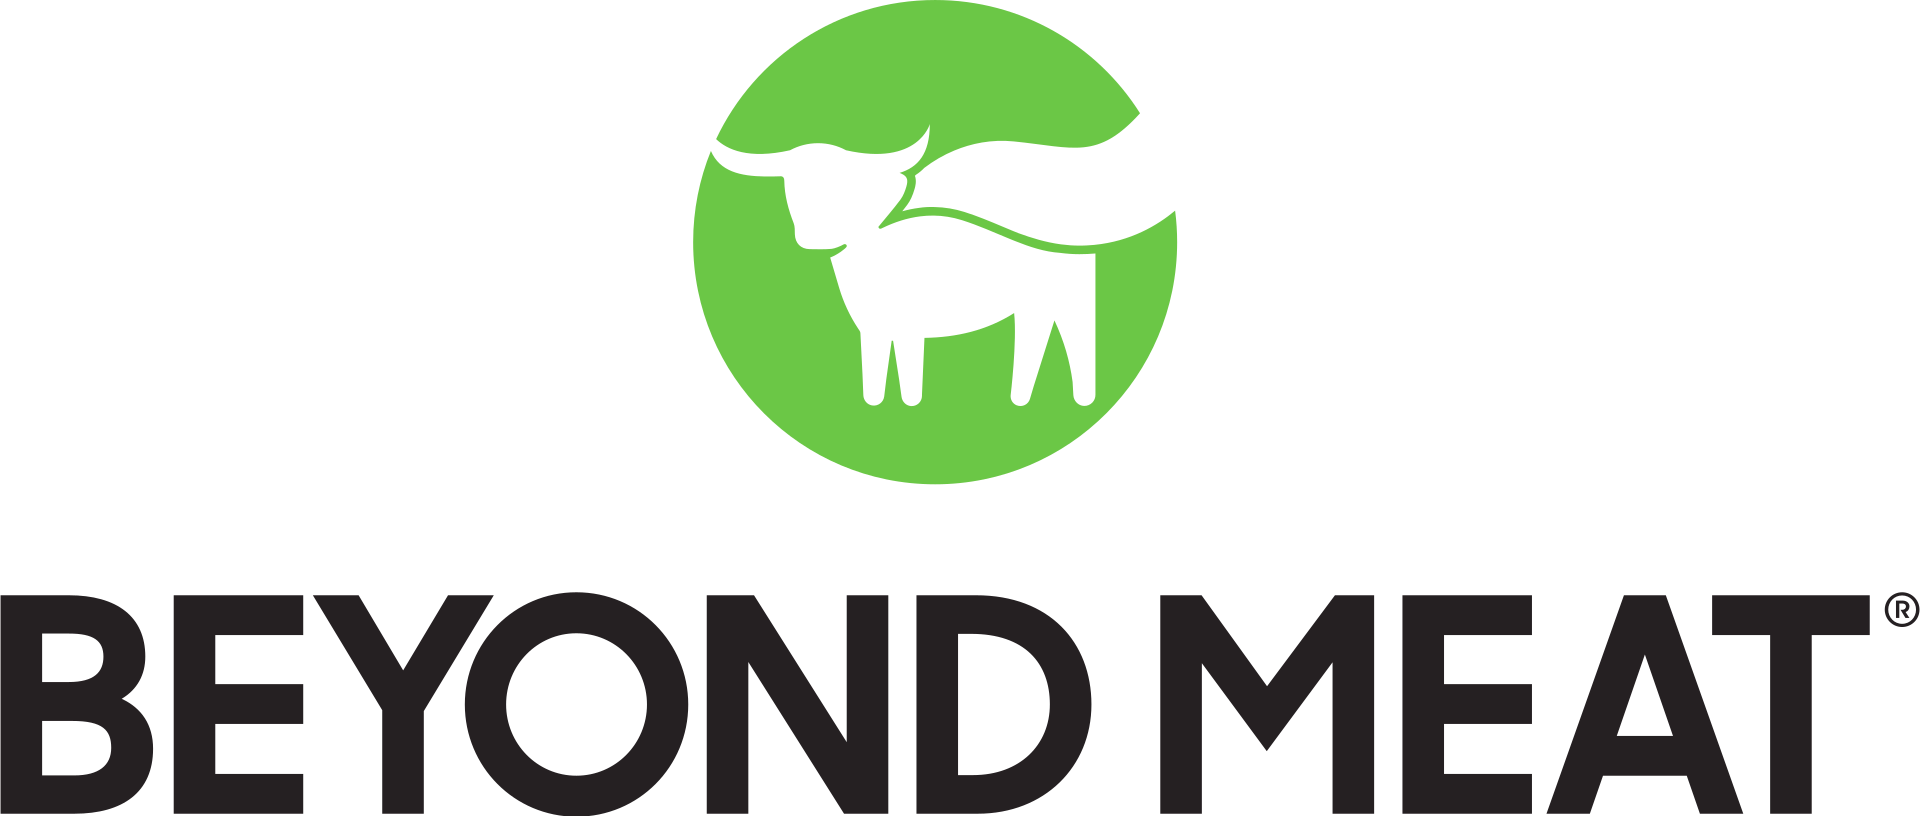 $BYND: Beyond Meat Ready for Next Bullish Cycle